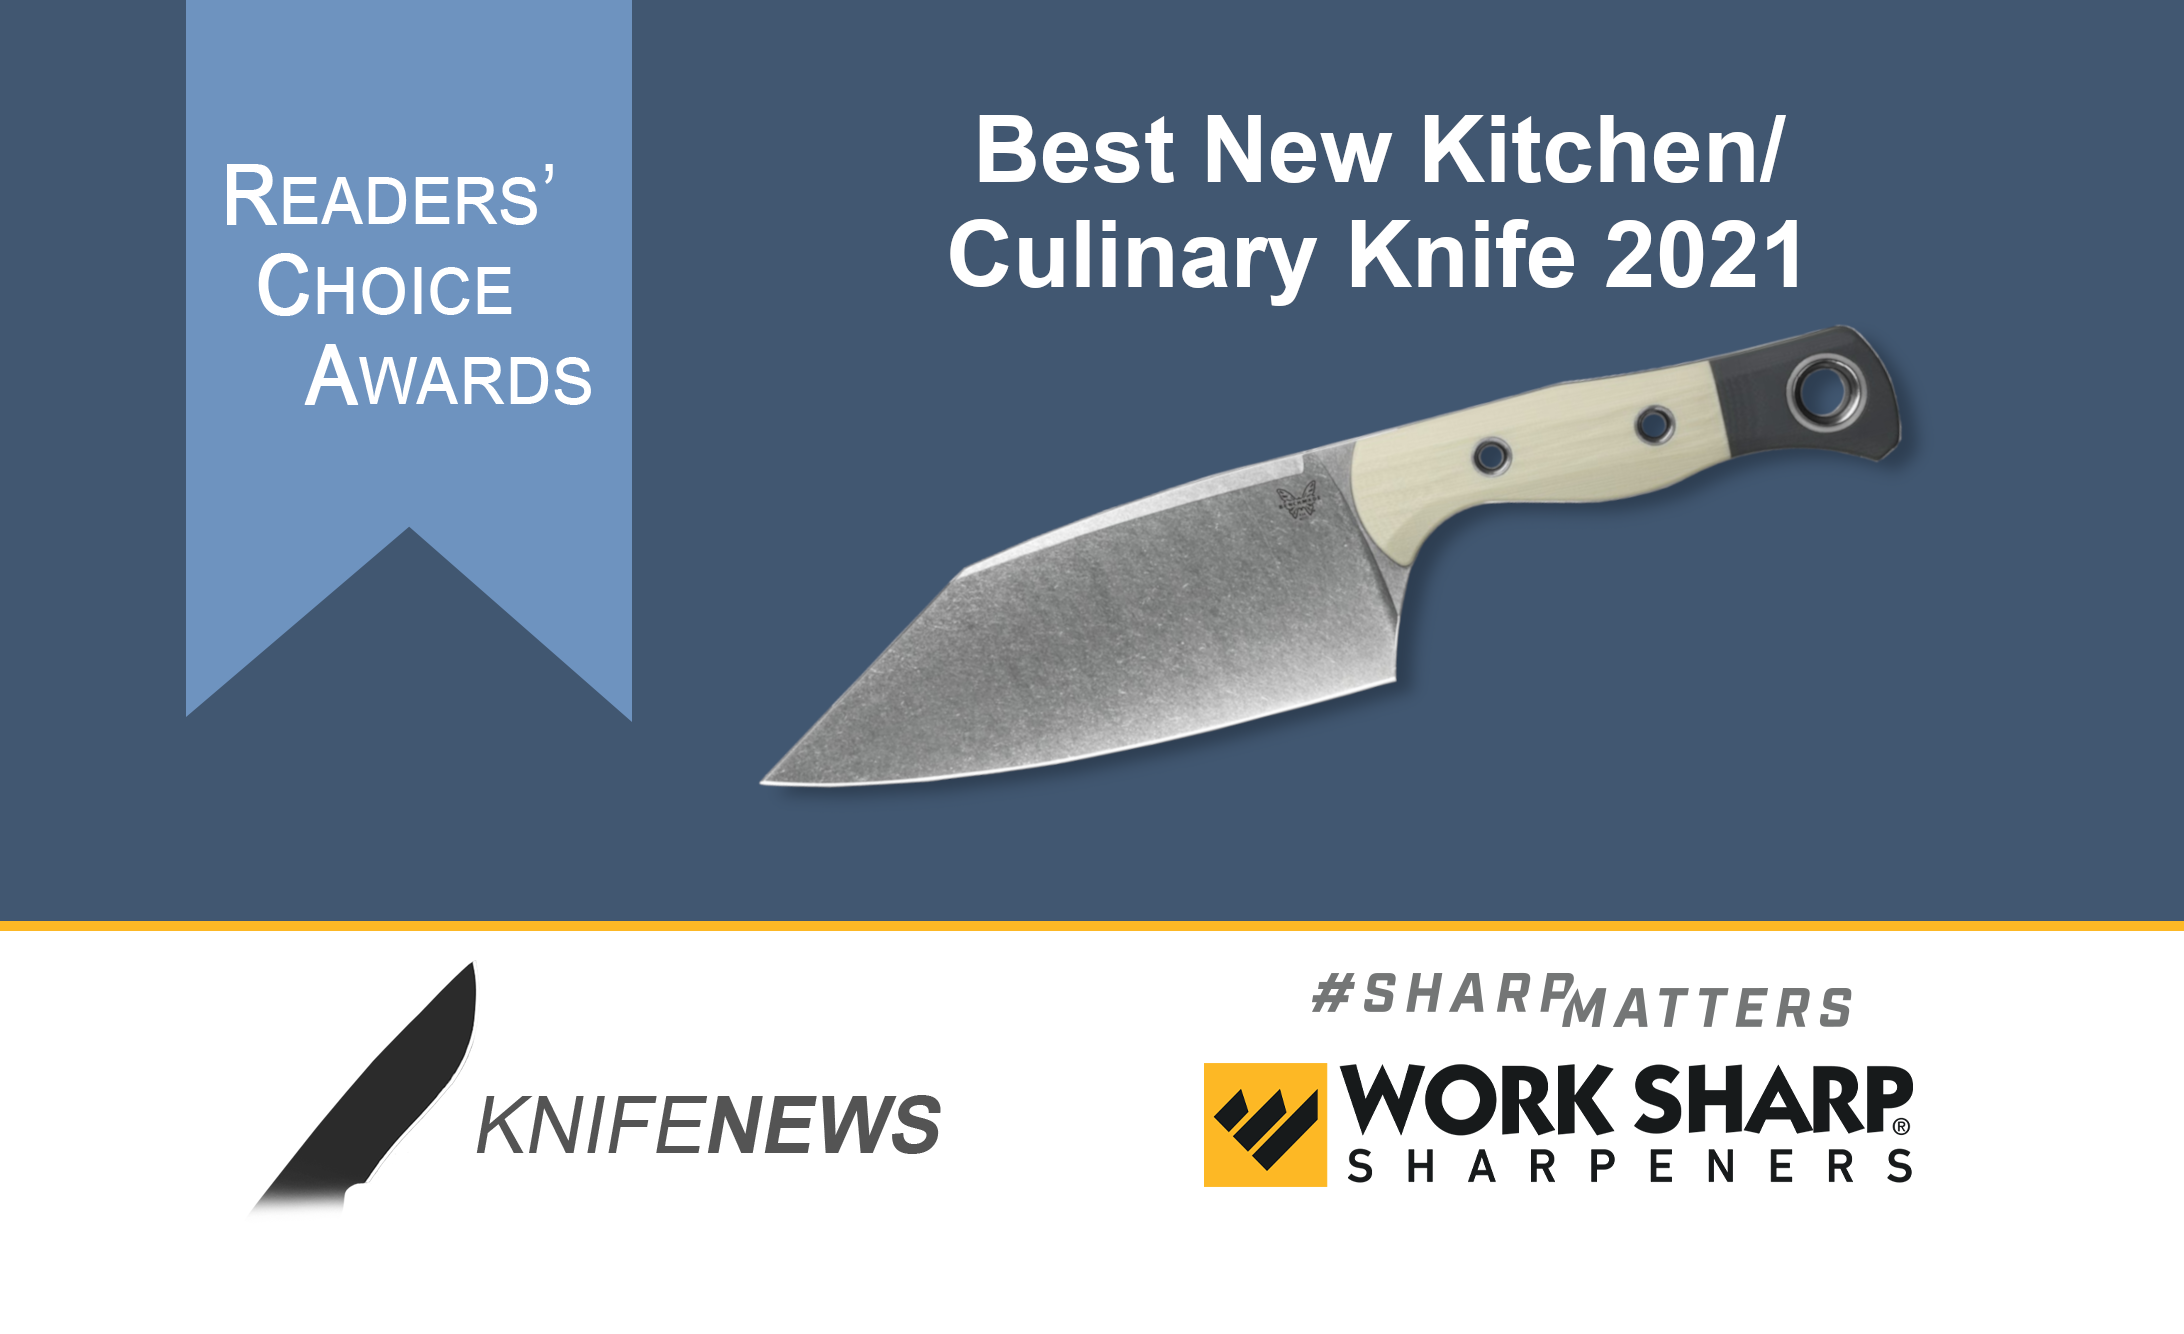 Global G-29 Classic 7 Wide Chef's Knife - KnifeCenter